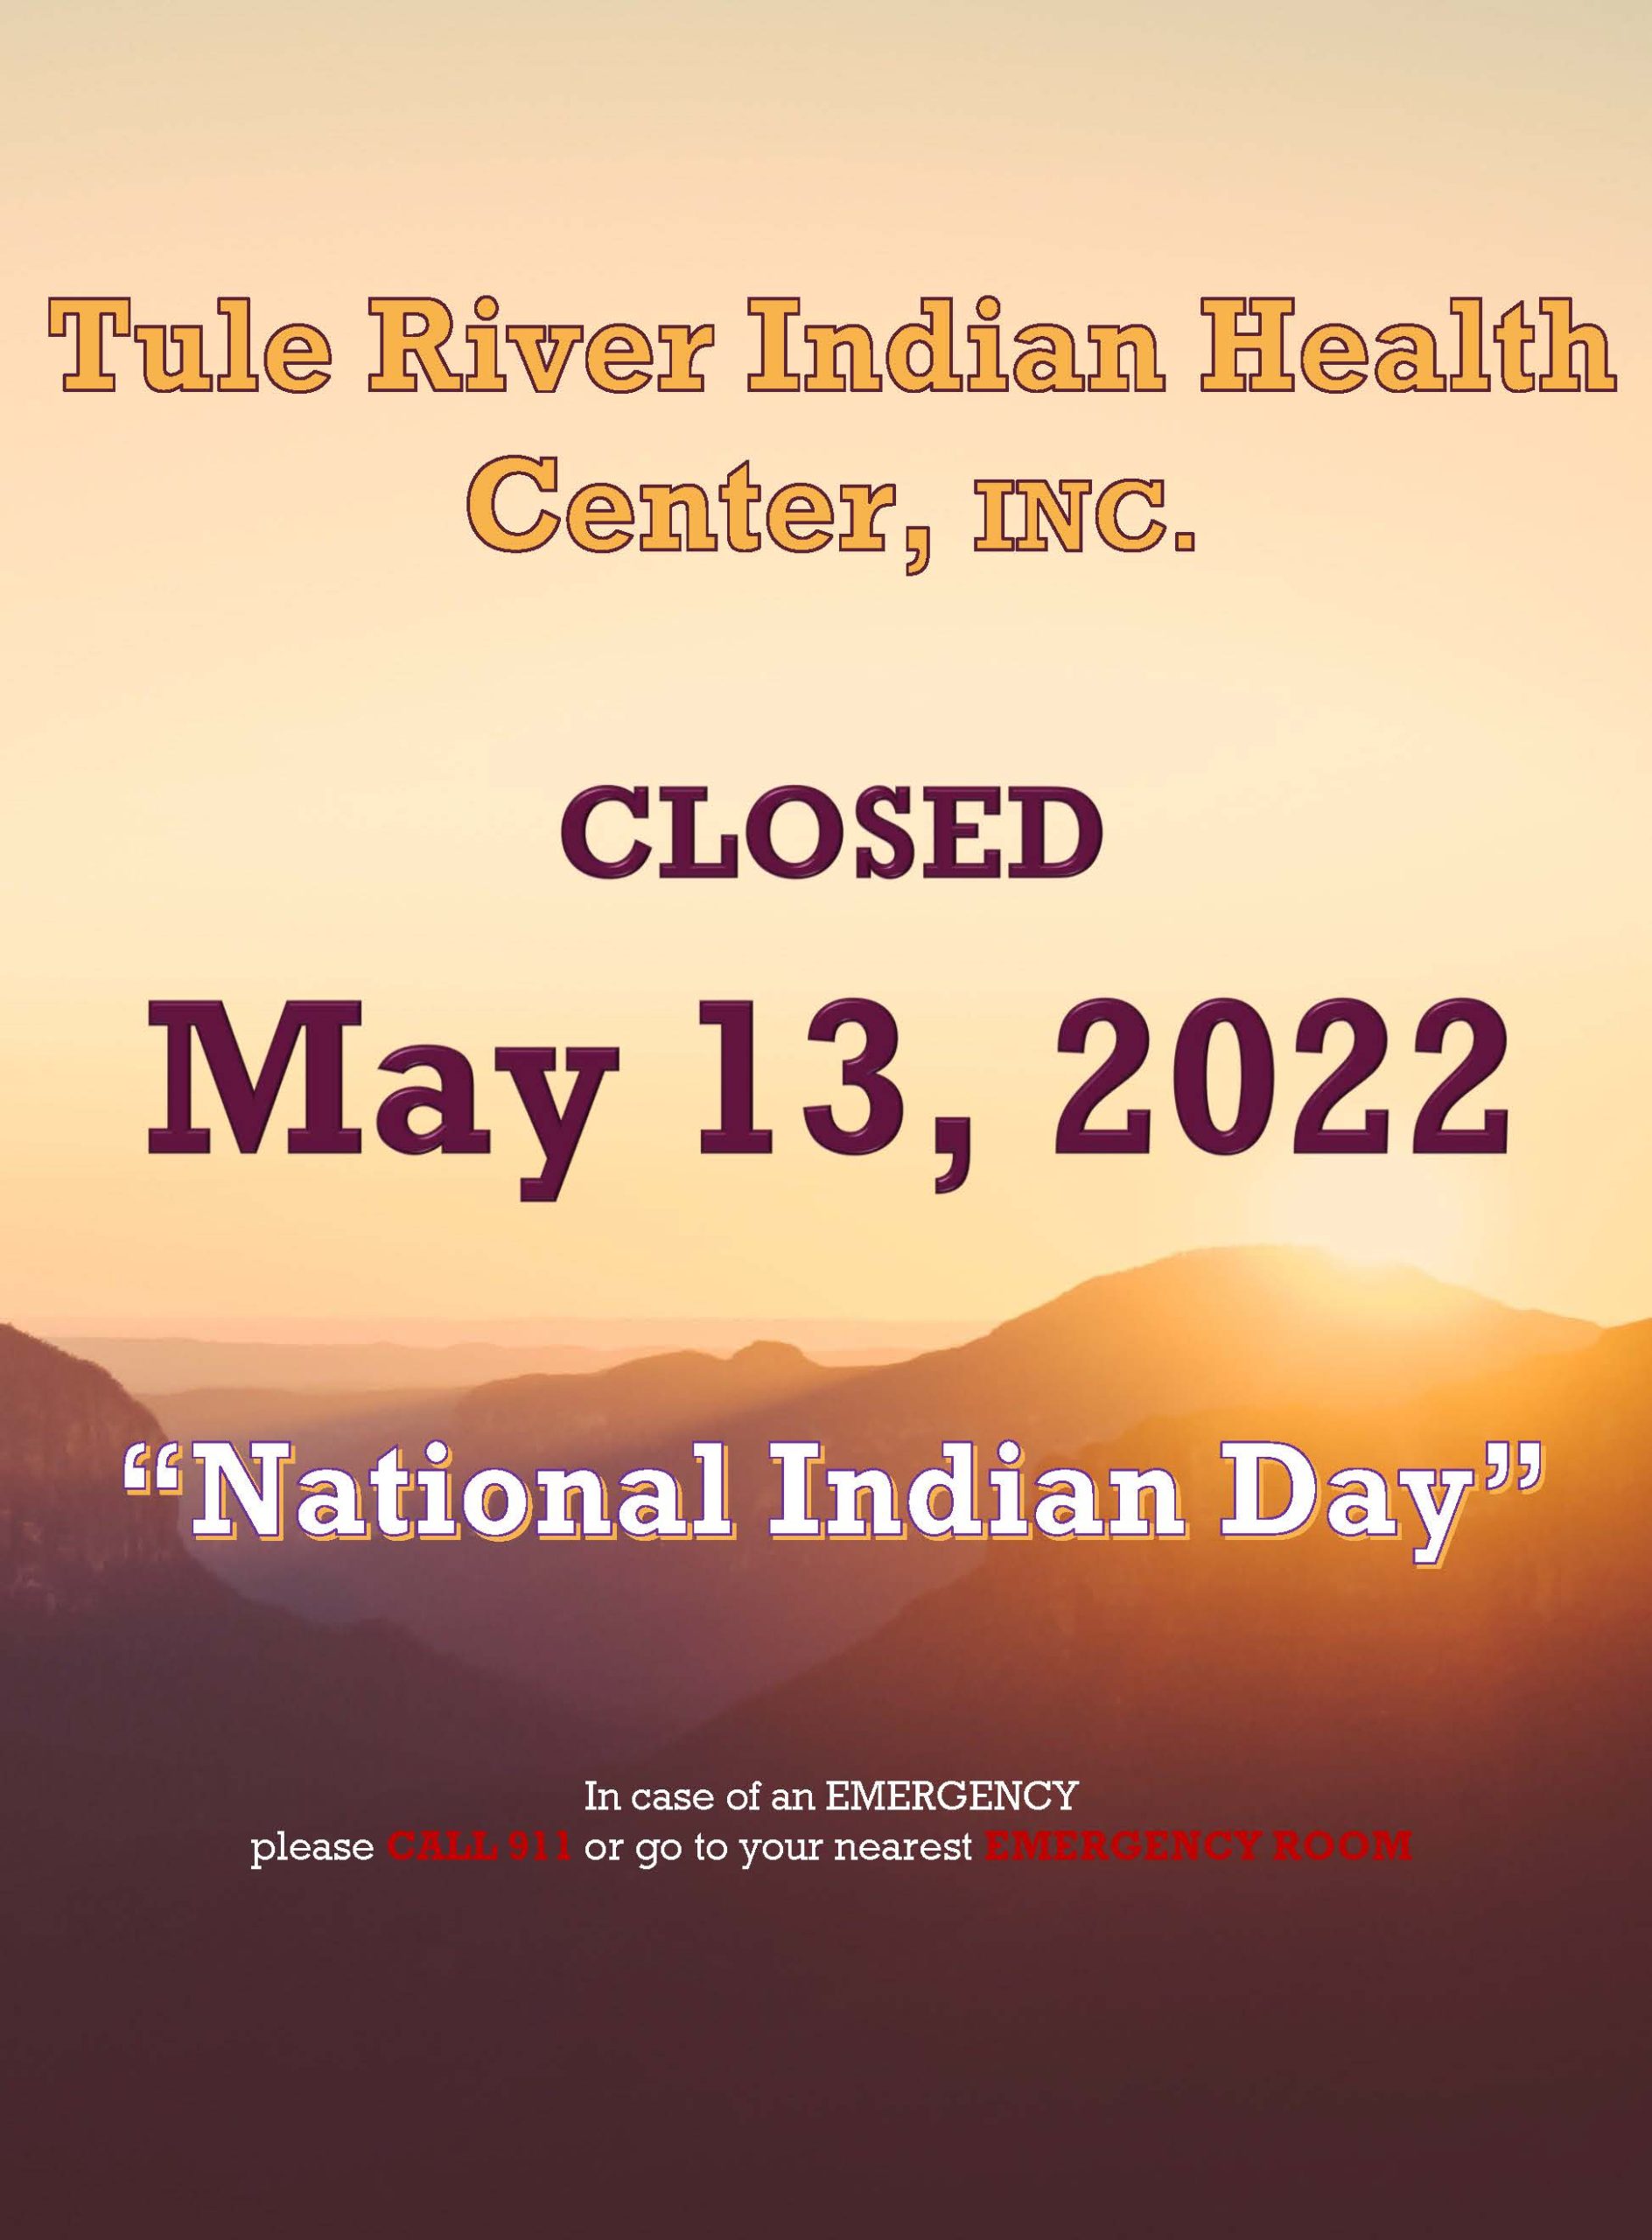 National Indian Day Tule River Indian Health Center, Inc.